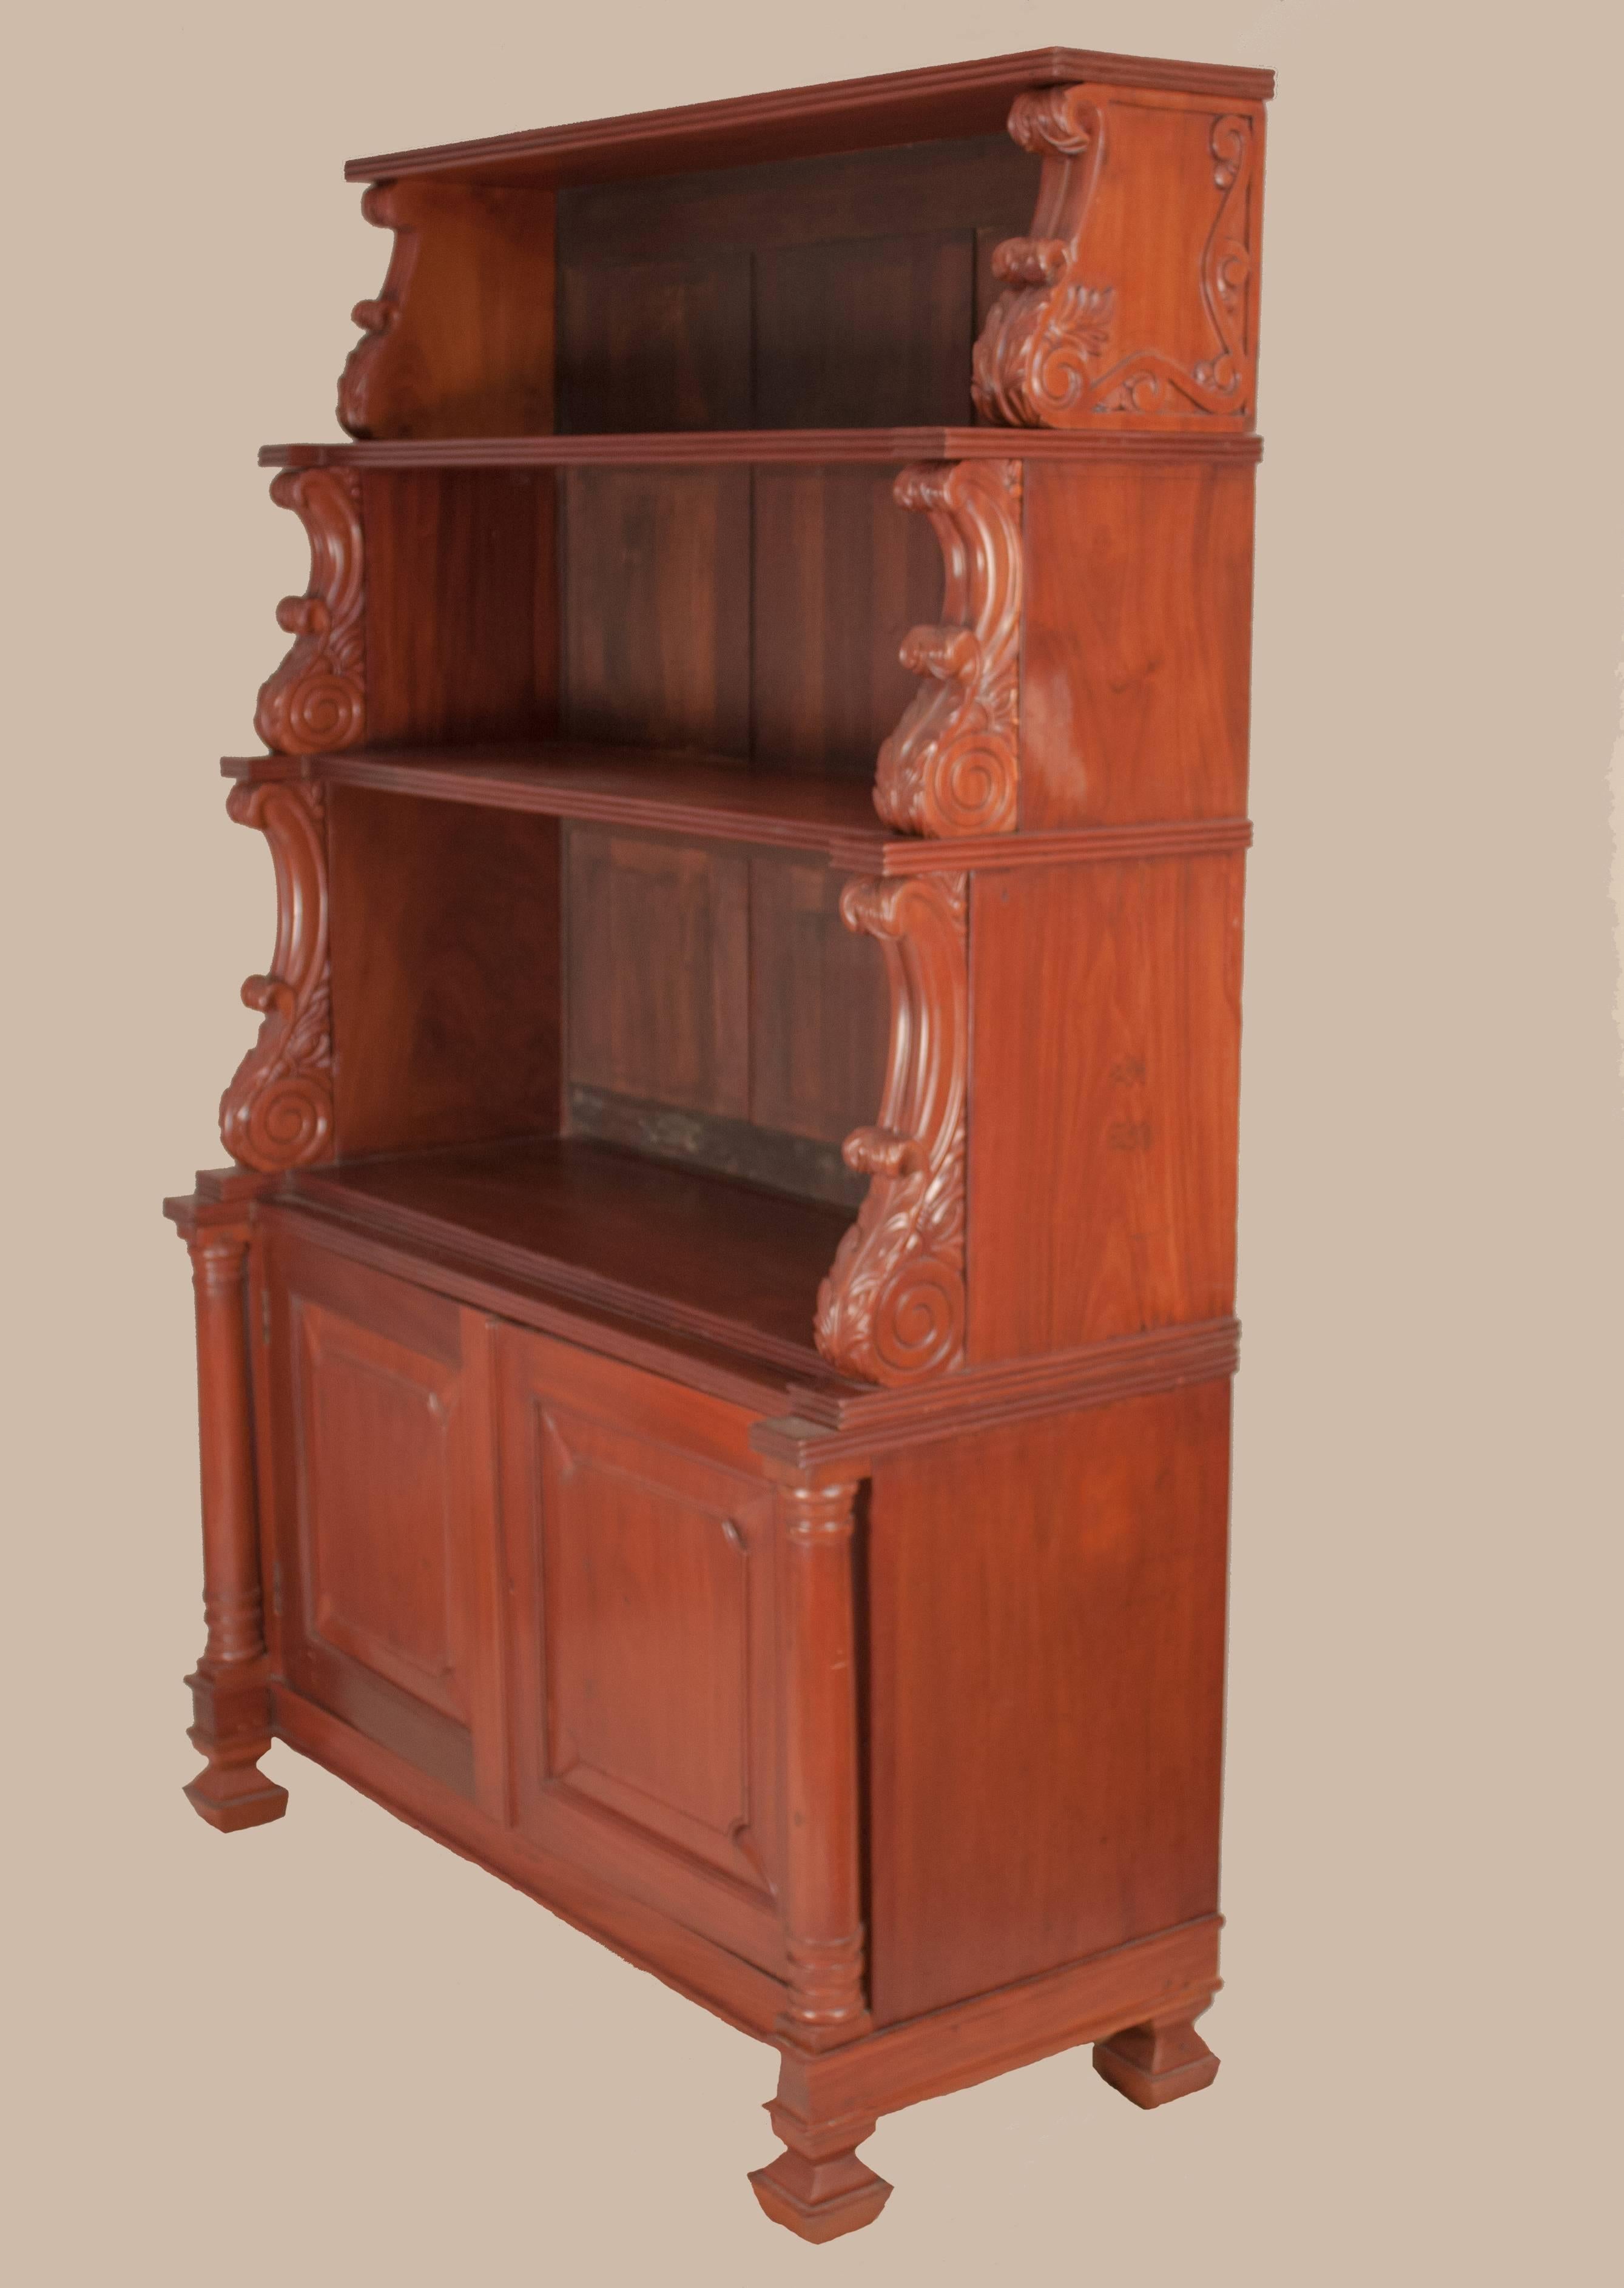 Indo-Portuguese hutch or display case in rich mahogany with carved acanthus details, circa 1900. The cabinet is in two parts with display shelves on top and a two-door cabinet with lock, bounded by columns, on the bottom. The back panels of the